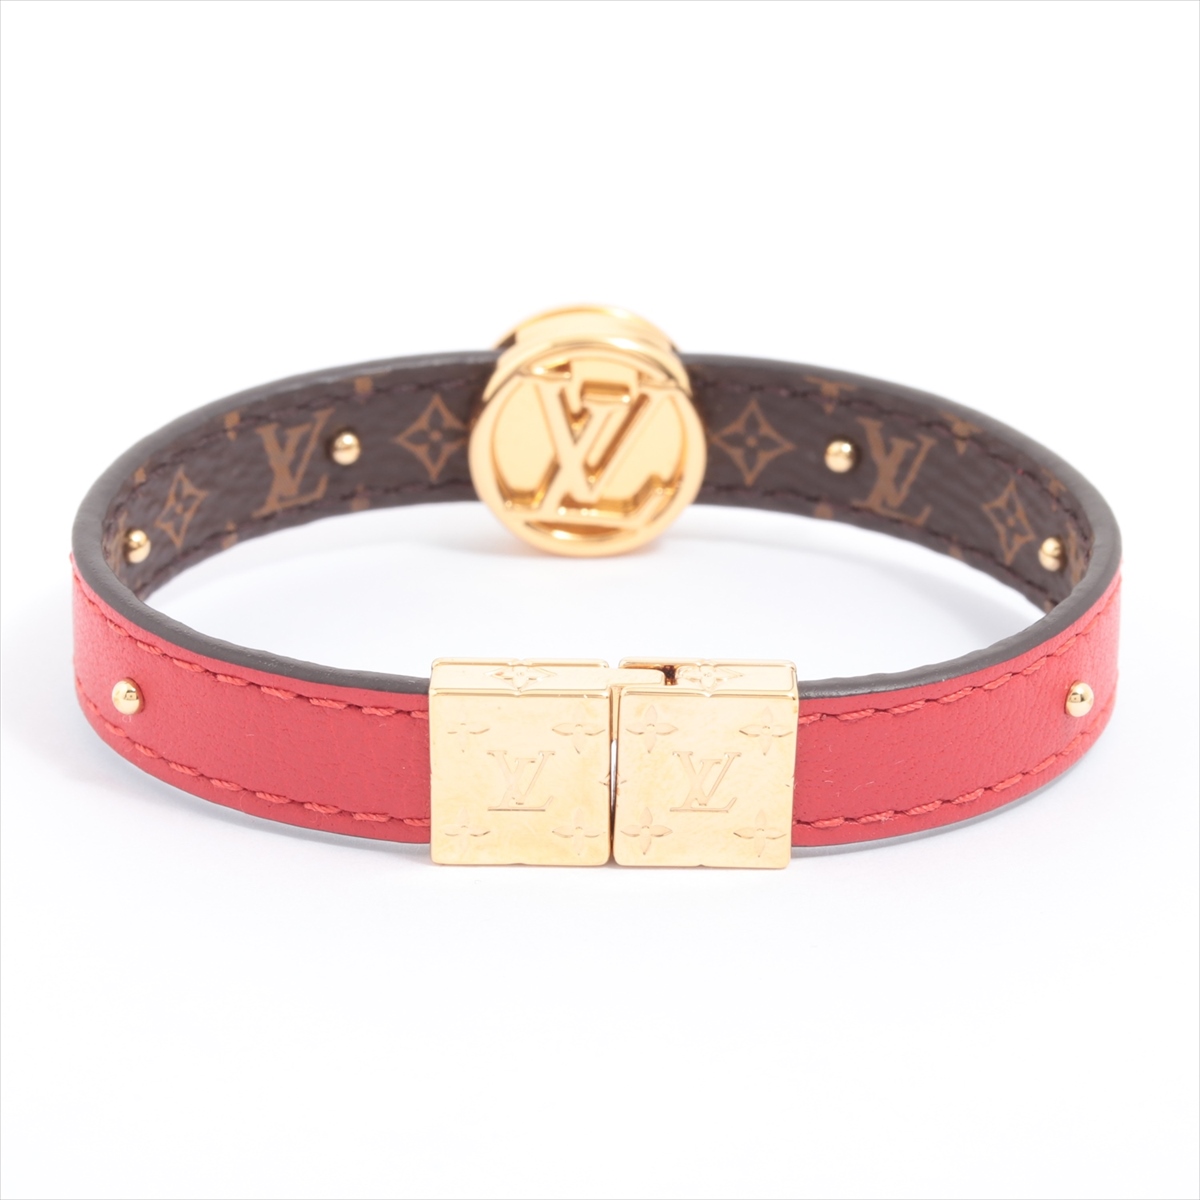 LV Eclipse Leather Bracelet Other Leathers - Accessories